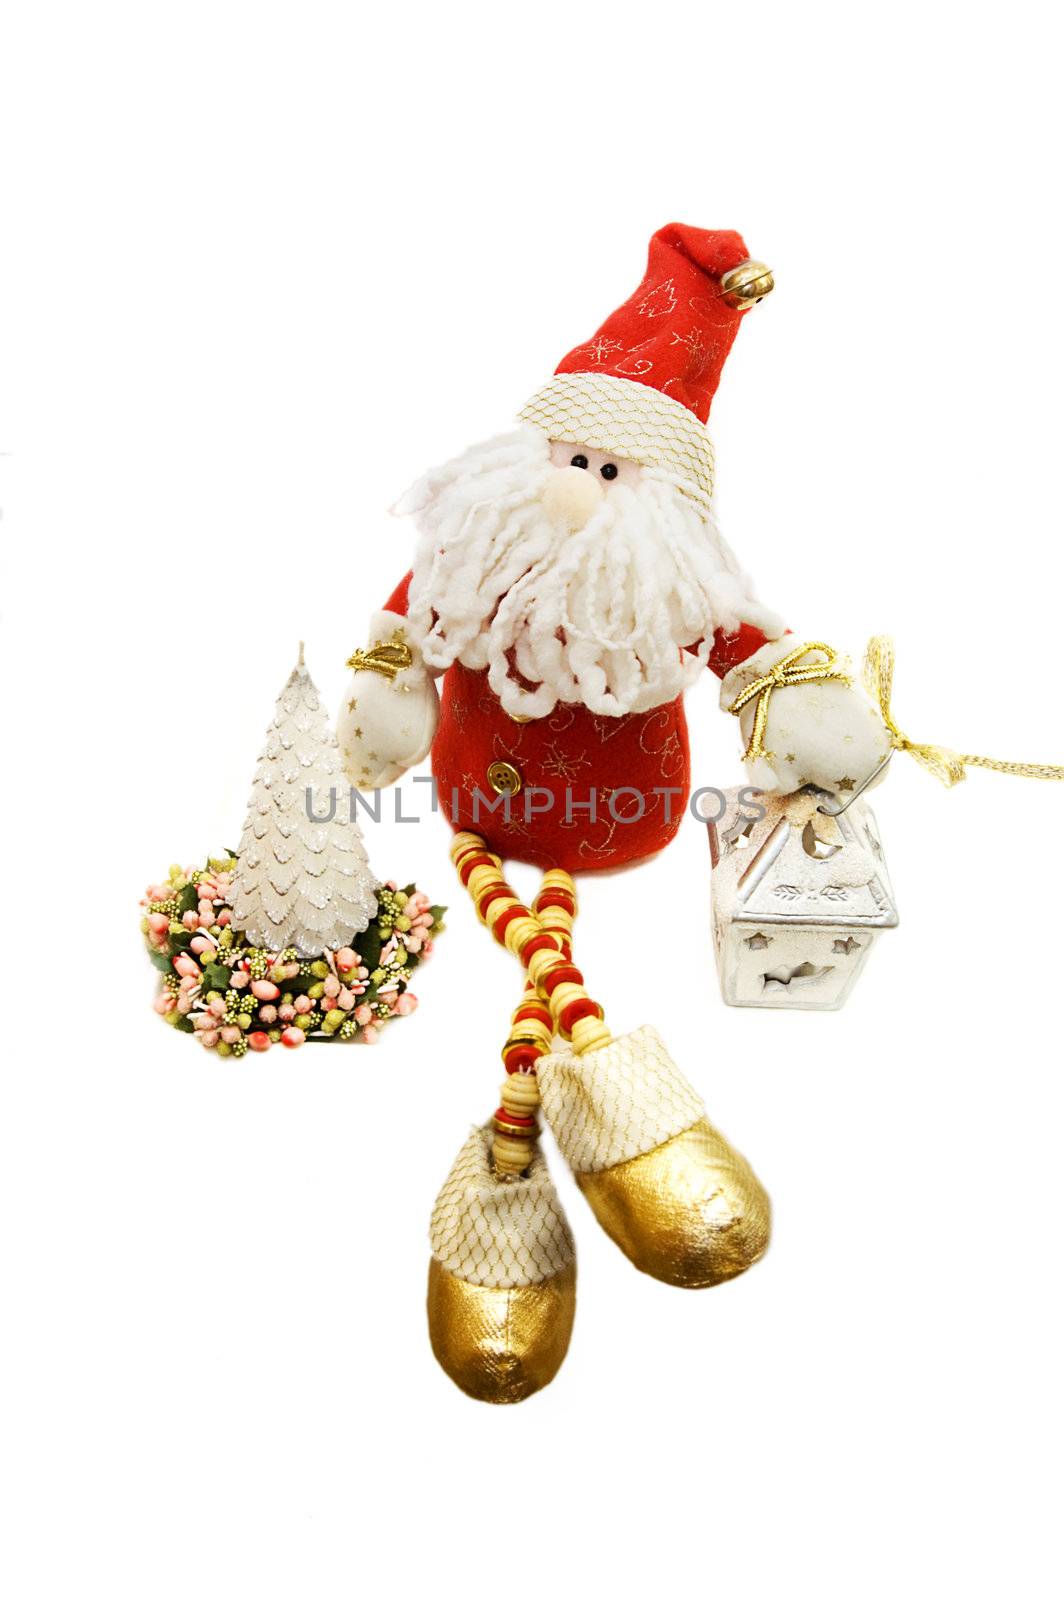 Santa Claus toy with Christmas tree by Angel_a